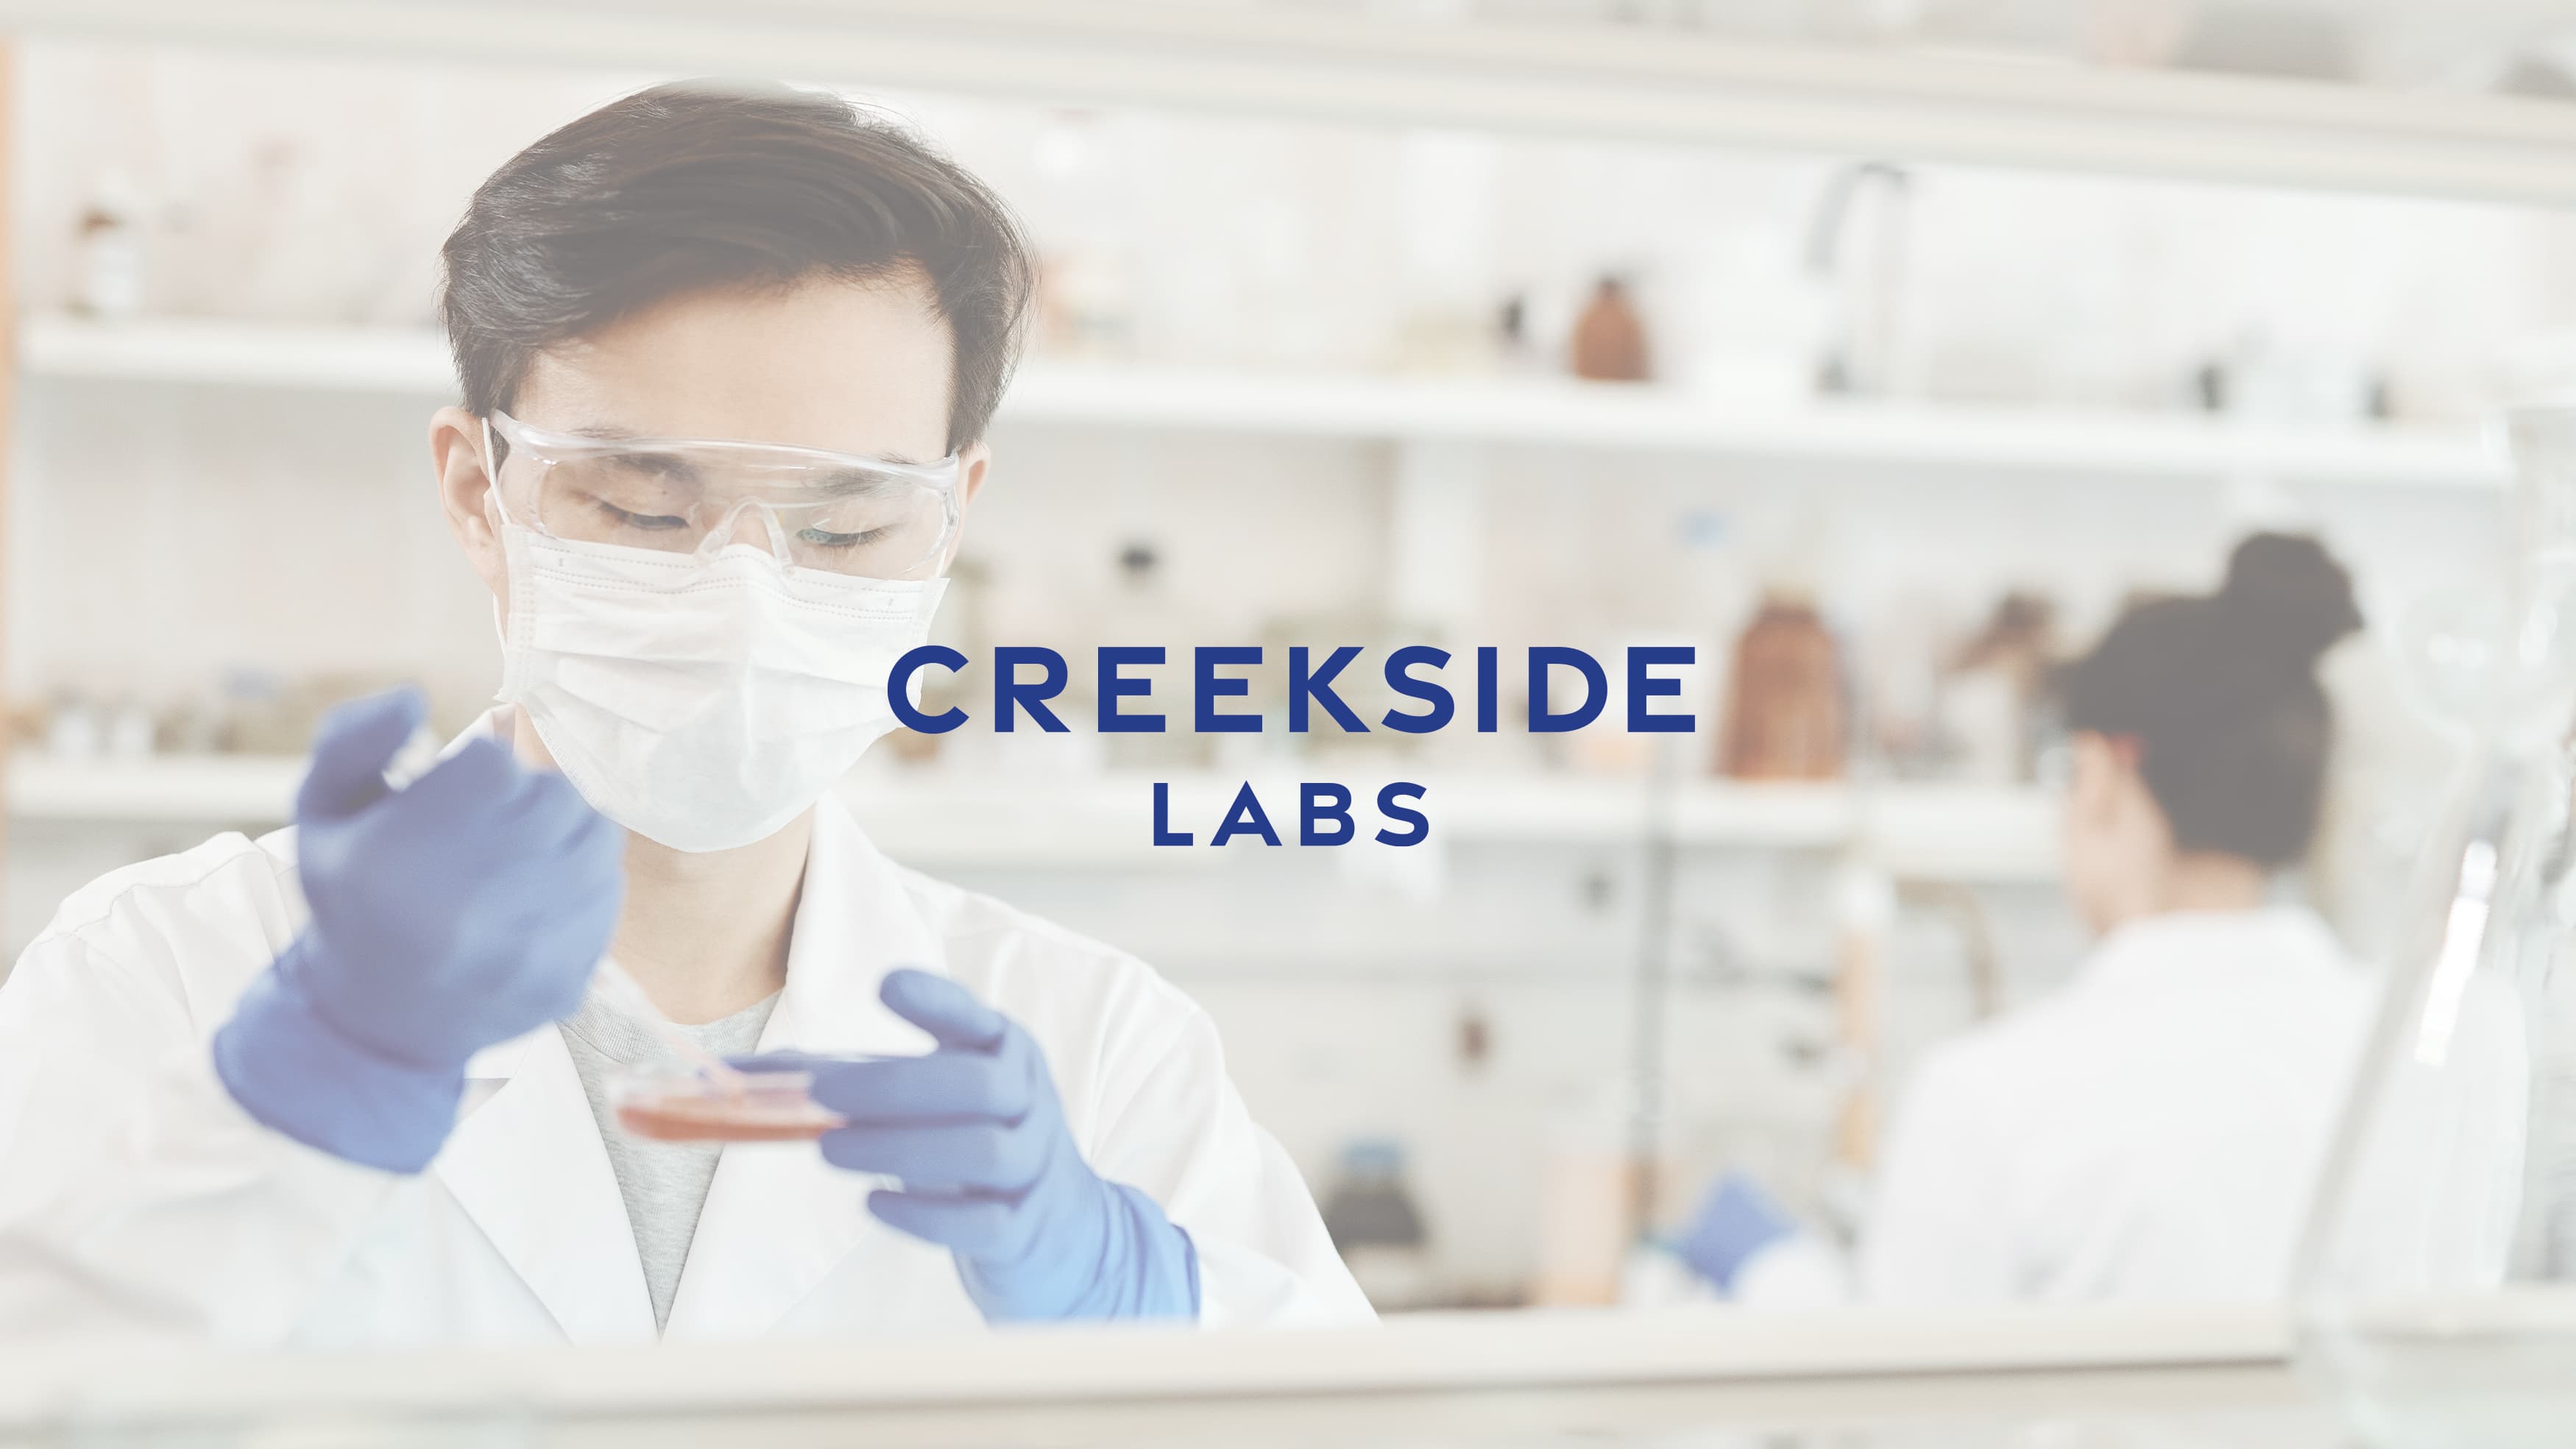 Creekside Labs logo against an image of a man with a syringe in a lab coat.